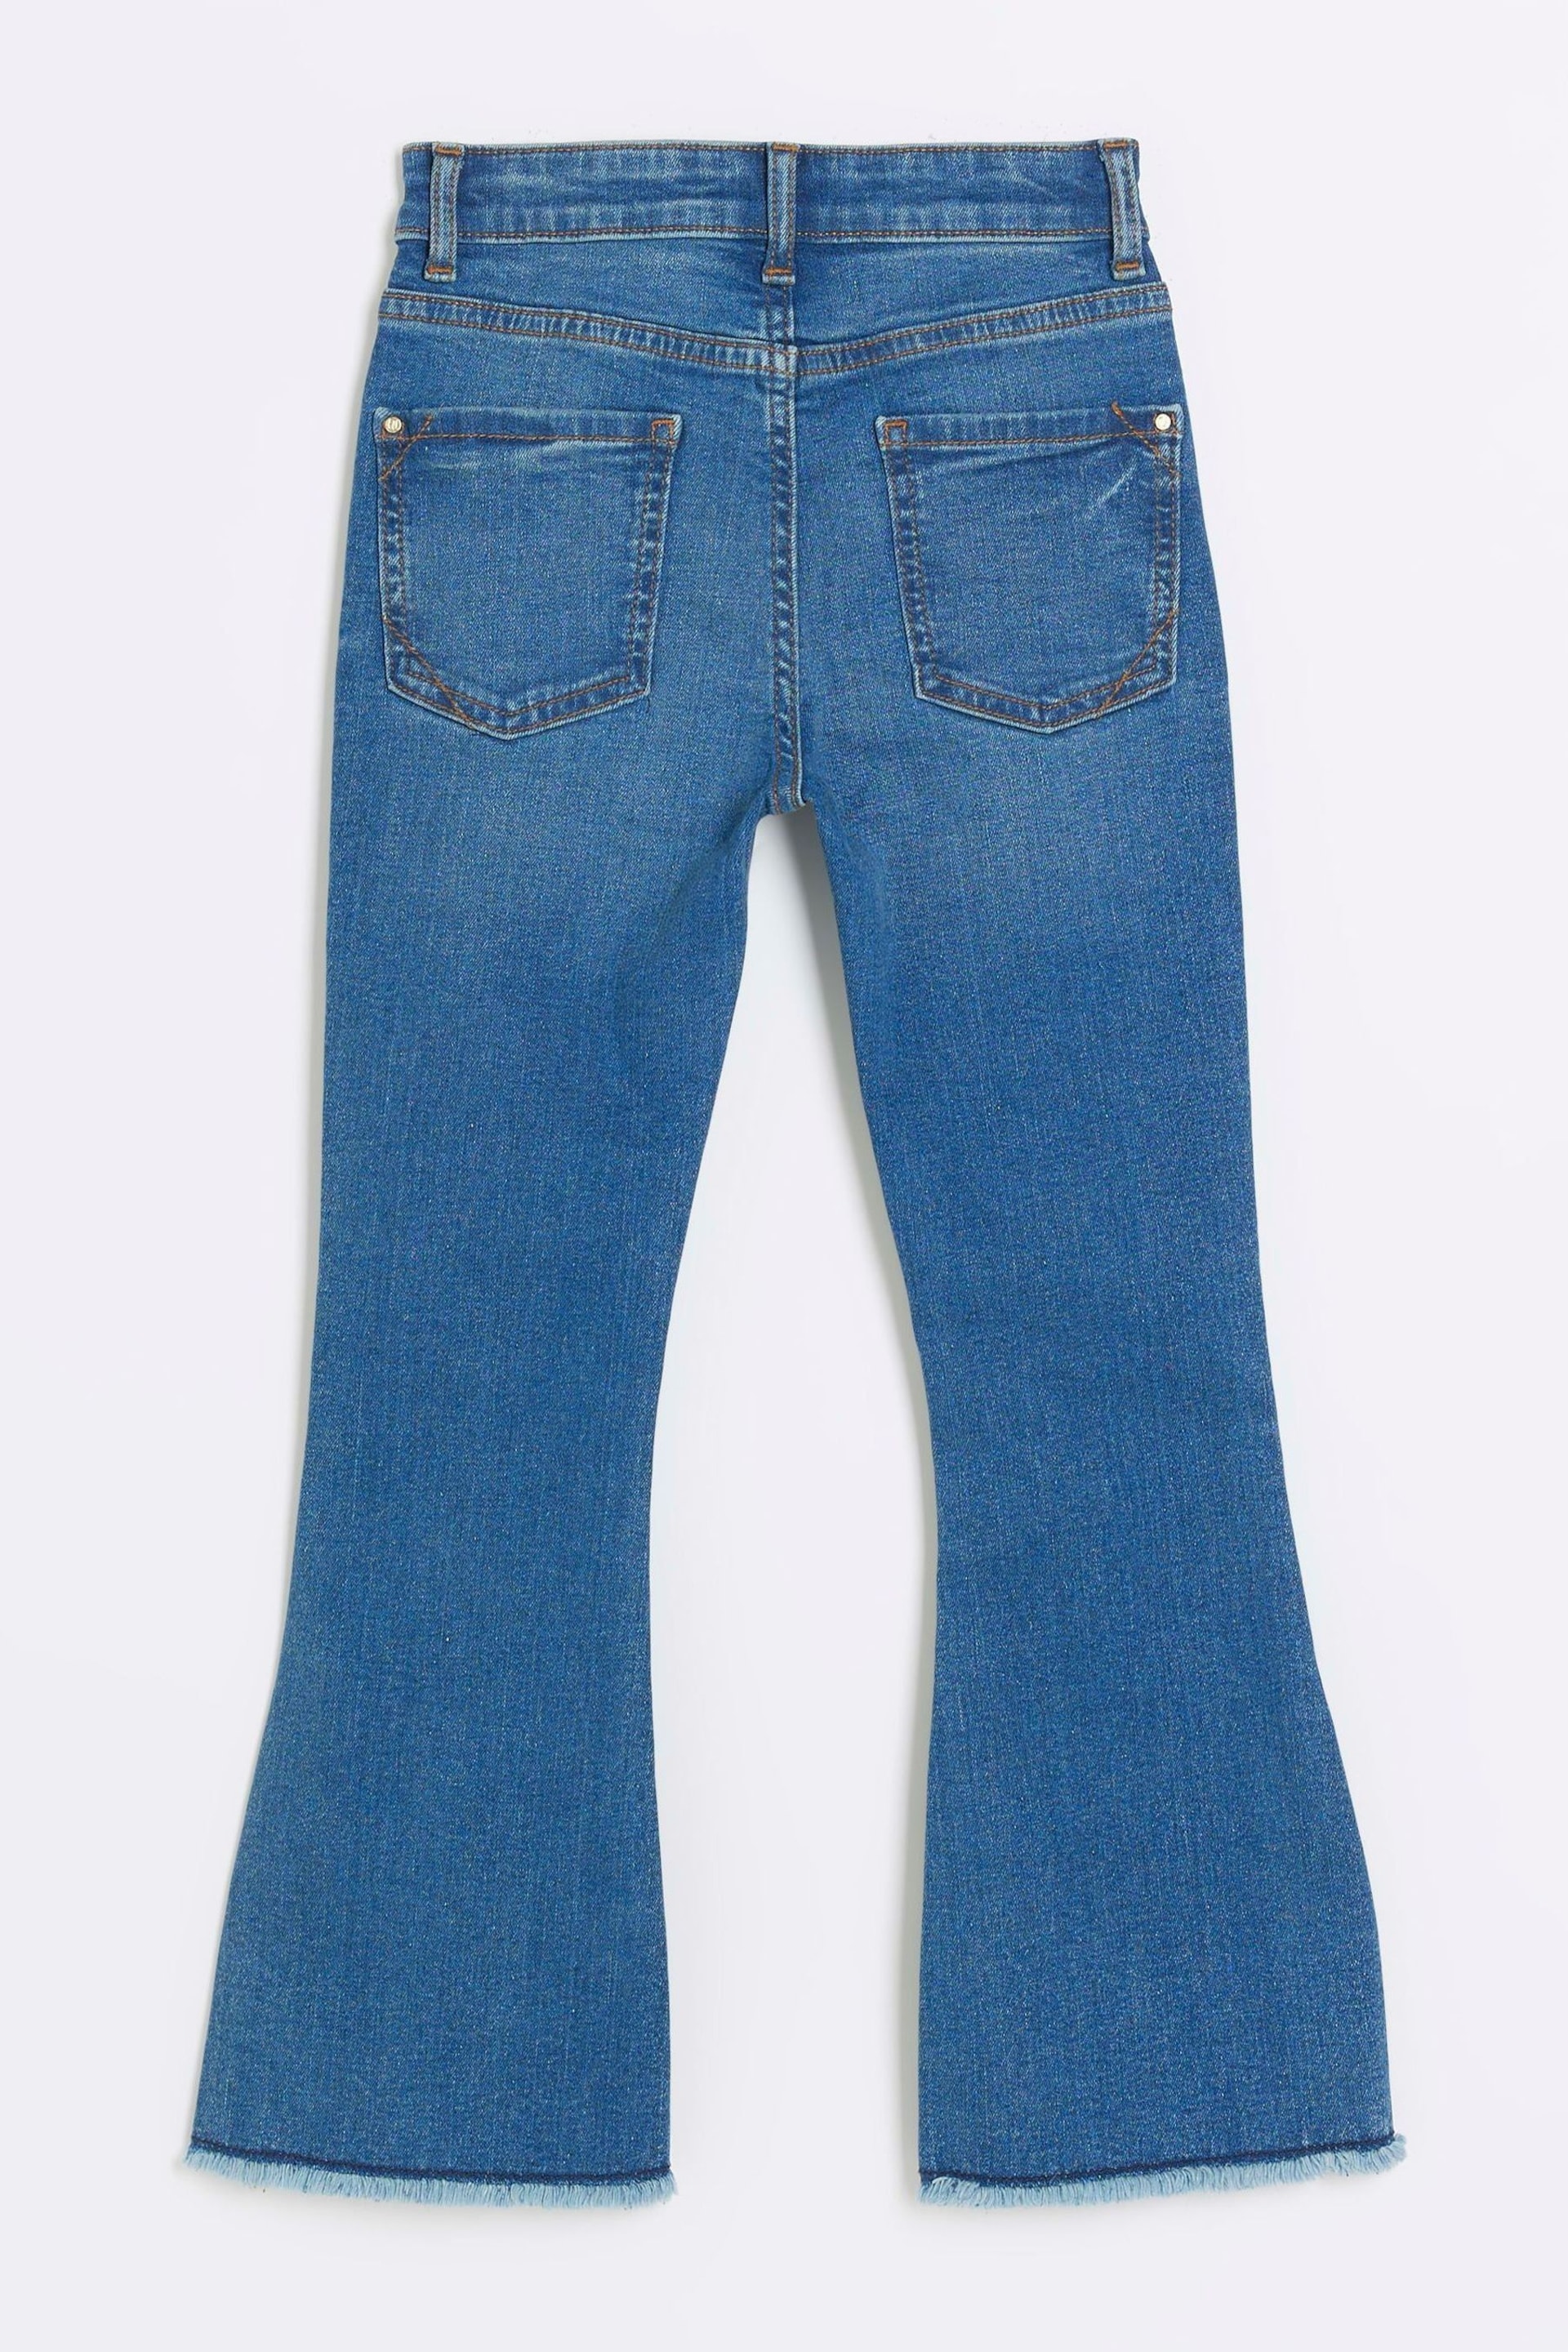 River Island Dark Blue Girls Wash Ripped Flare Jeans - Image 4 of 5